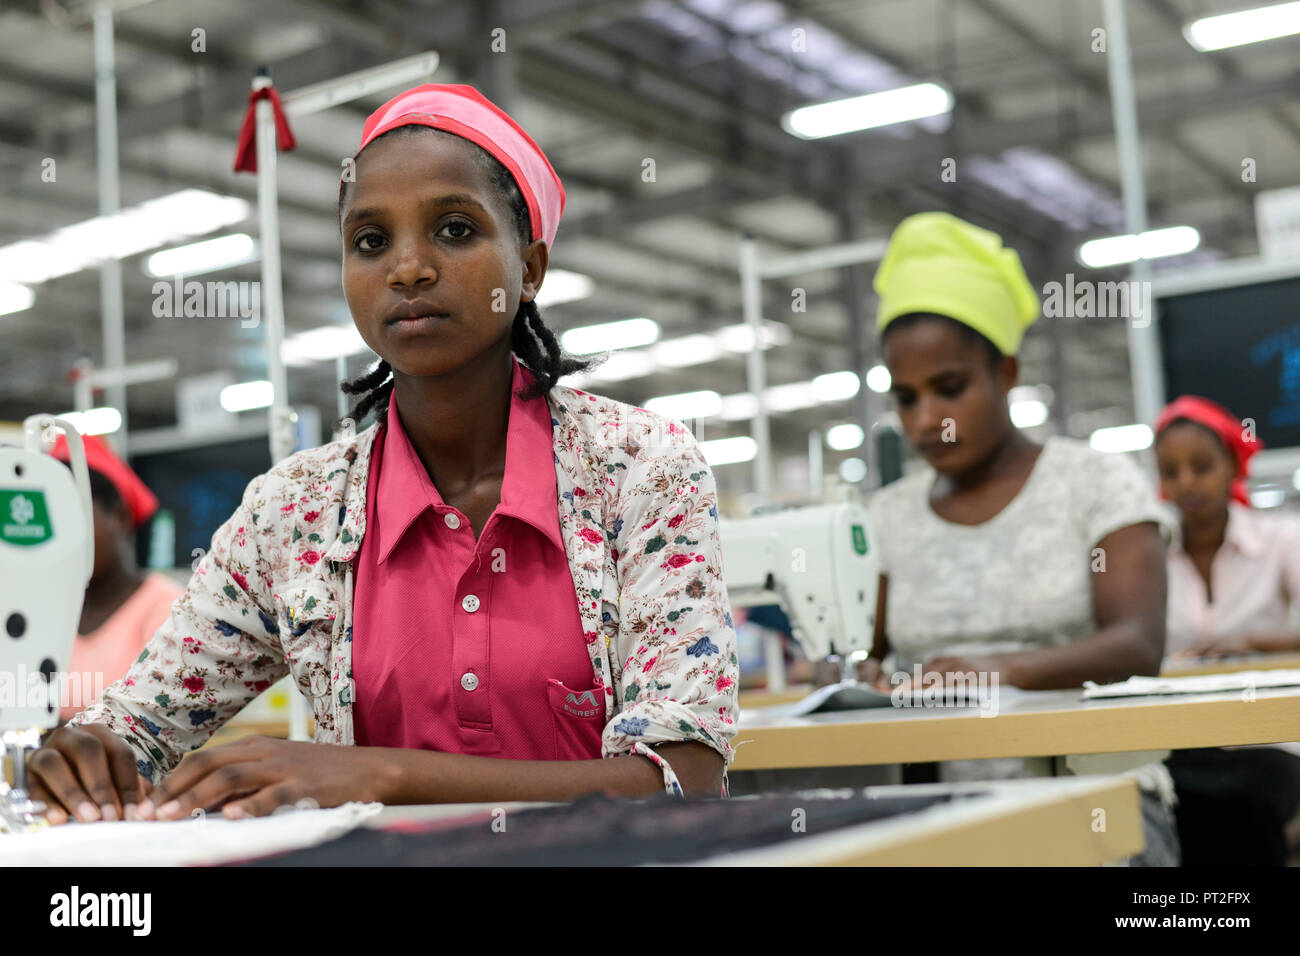 ETHIOPIA , Southern Nations, Hawassa or Awasa, Hawassa Industrial Park, chinese-built for the ethiopian government to attract foreign investors with low rent and tax free to establish a textile industry and create thousands of new jobs, taiwanese company Everest Textile Co. Ltd.produces textiles from synthetic fabric for export, training department for new worker / AETHIOPIEN, Hawassa, Industriepark, gebaut durch chinesische Firmen fuer die ethiopische Regierung um die Hallen fuer Textilbetriebe von Investoren zu vermieten, taiwanesische Firma Everest Textile Co. Ltd. produziert Textilien aus  Stock Photo